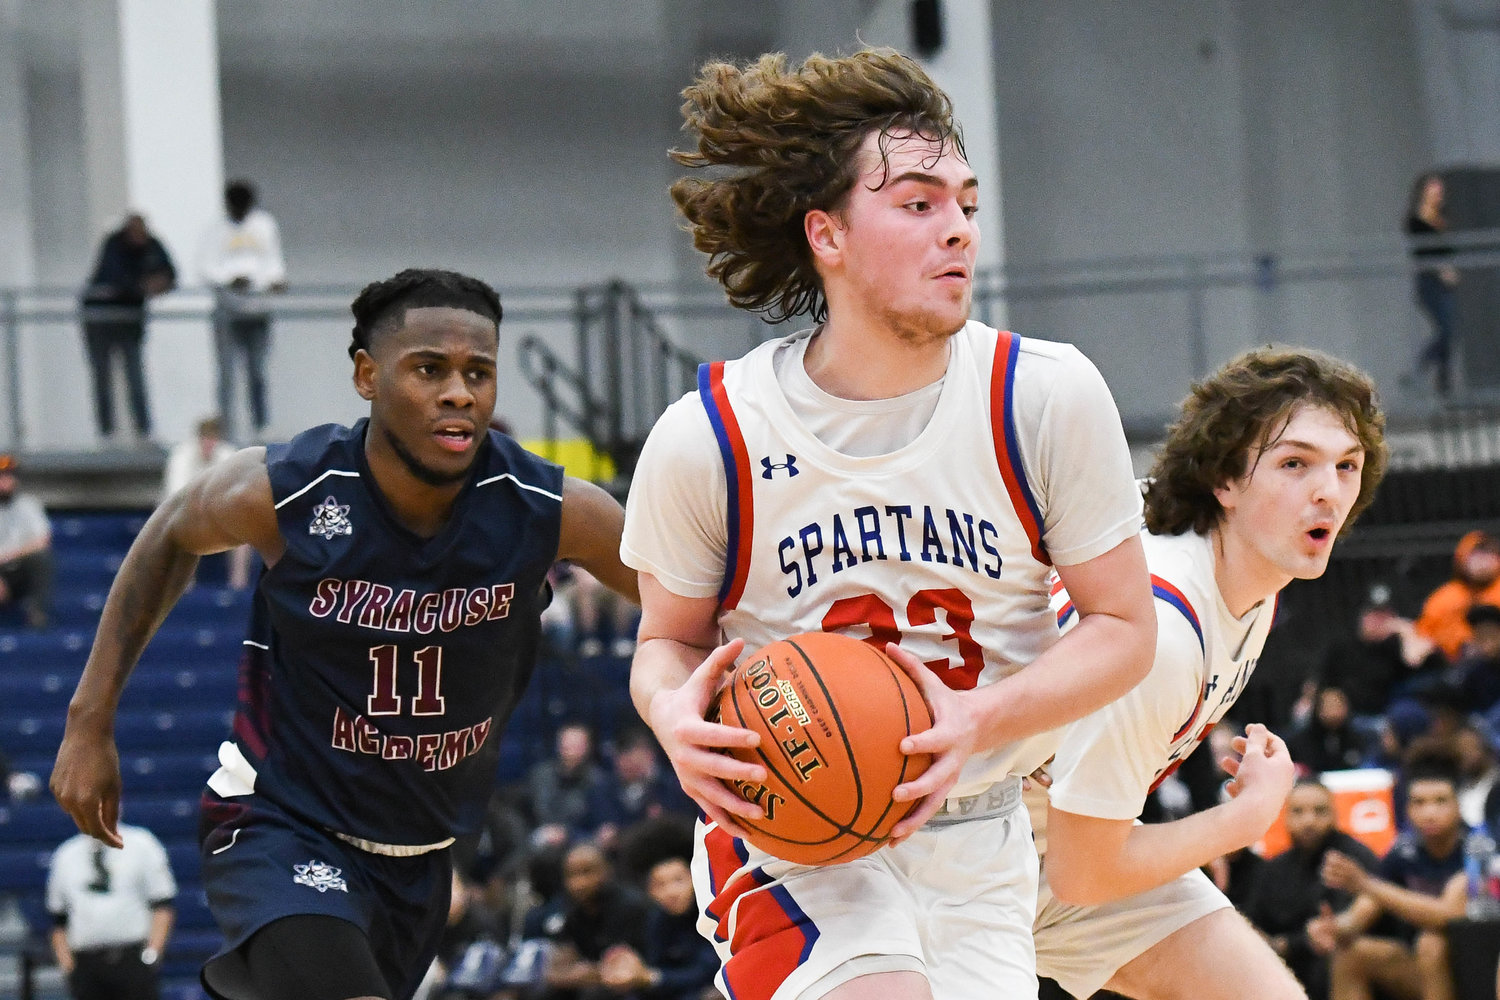 ON THE MOVE — New Hartford player Zach Philipkoski (23) dribbles the ball during the Section III Class A final. Philipkoski was New Hartford’s top player in helping the Spartans on a run to the Class A state championship game.